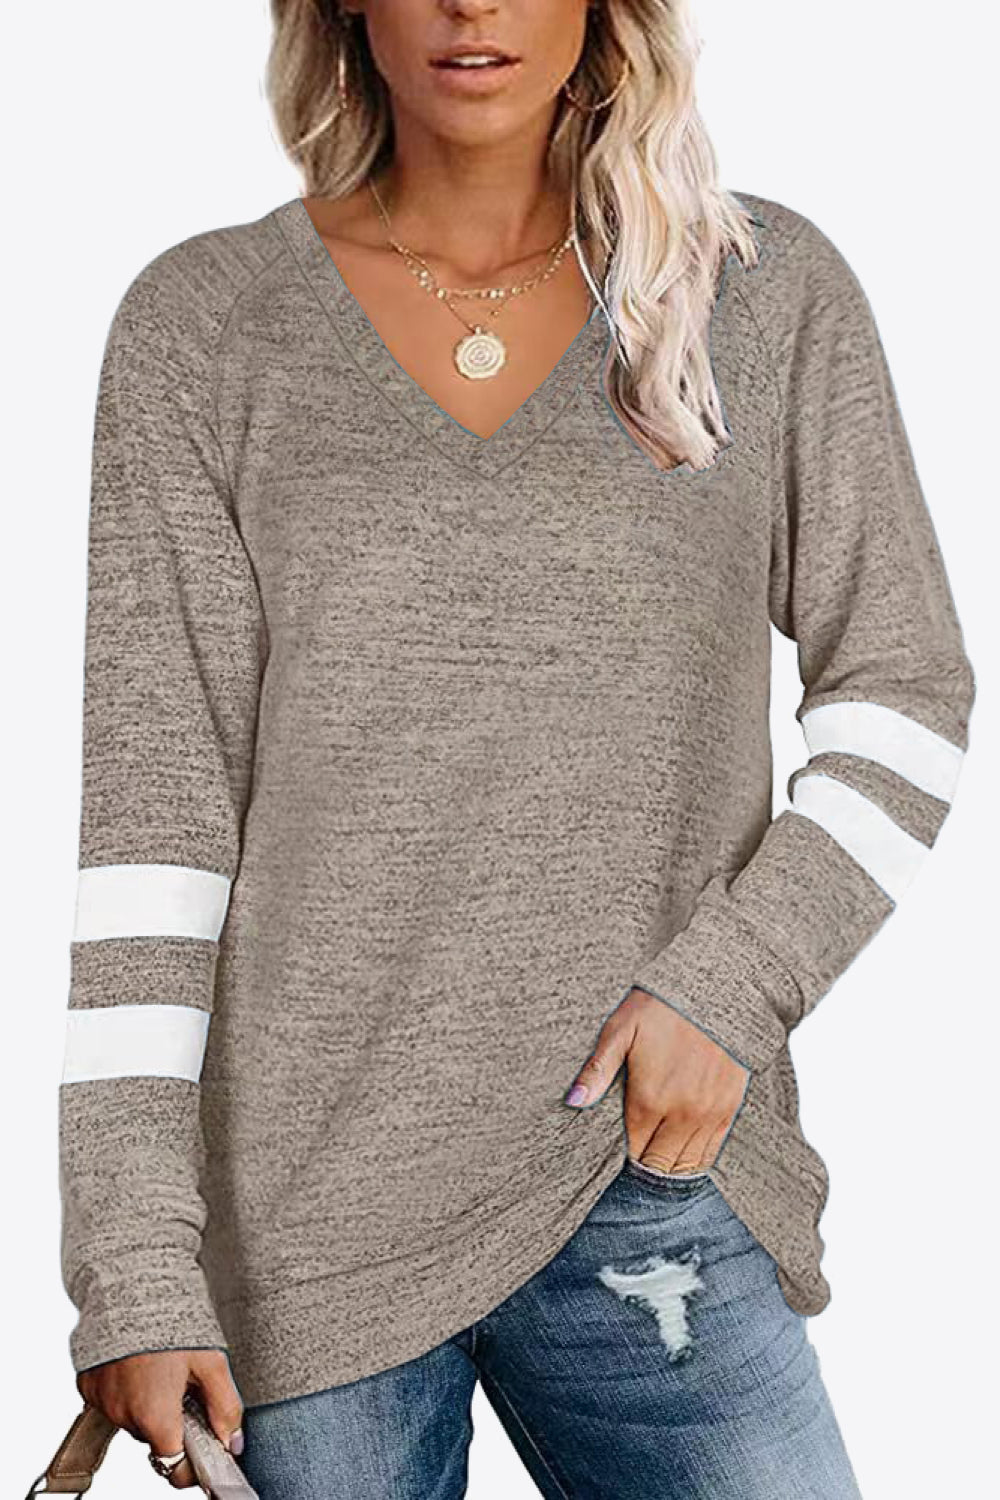 Striped Contrast Raglan Sleeve Top - Kawaii Stop - Casual Chic, Classic Style, Comfortable, Contrast Sleeve Top, Everyday Wear, H&L&L, Long Sleeve, Ship From Overseas, Stretchy Material, Stylish, T-Shirt, T-Shirts, Tee, Versatile Look, Wardrobe Essential, Women's Clothing, Women's Top